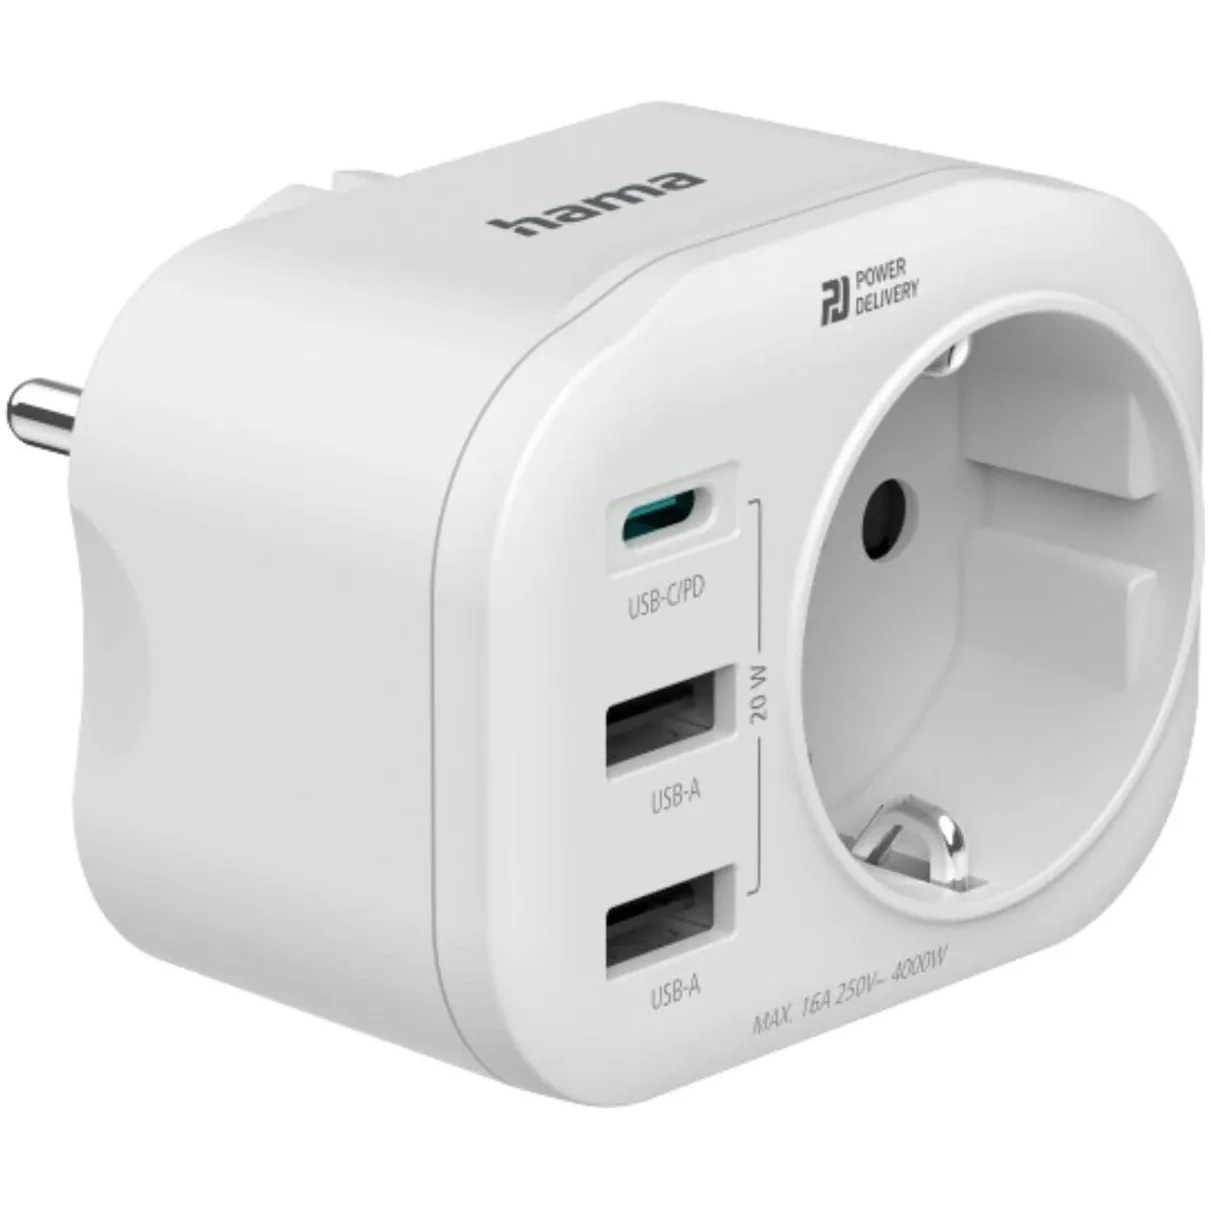 Hama 4-Way Multi-Adapter for Socket  1 USB-C PD  2 USB-A  1 Earthed Contact  20W Wit